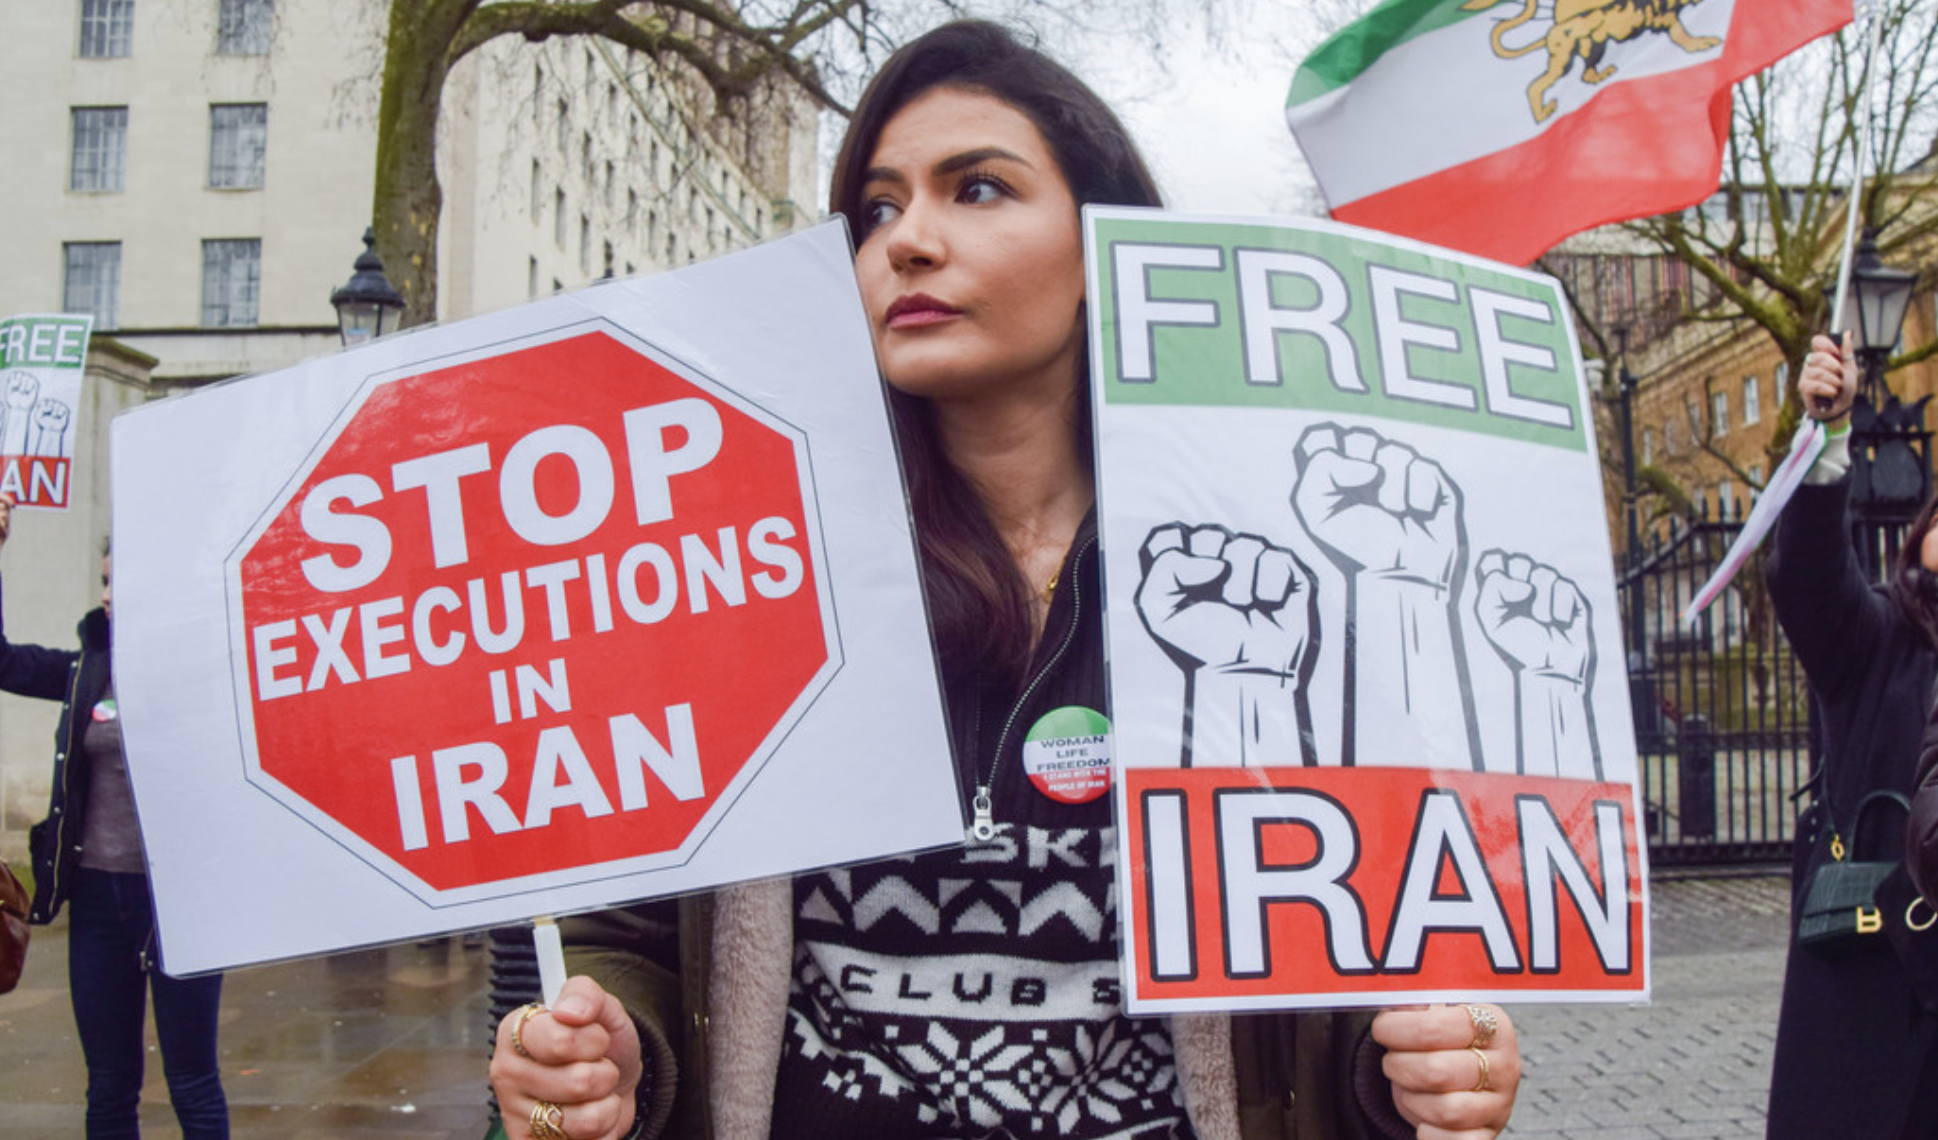 Demonstrators gathered outside Downing Street in protest against executions in Iran and in support of freedom for Iran, 14 January, 2023.